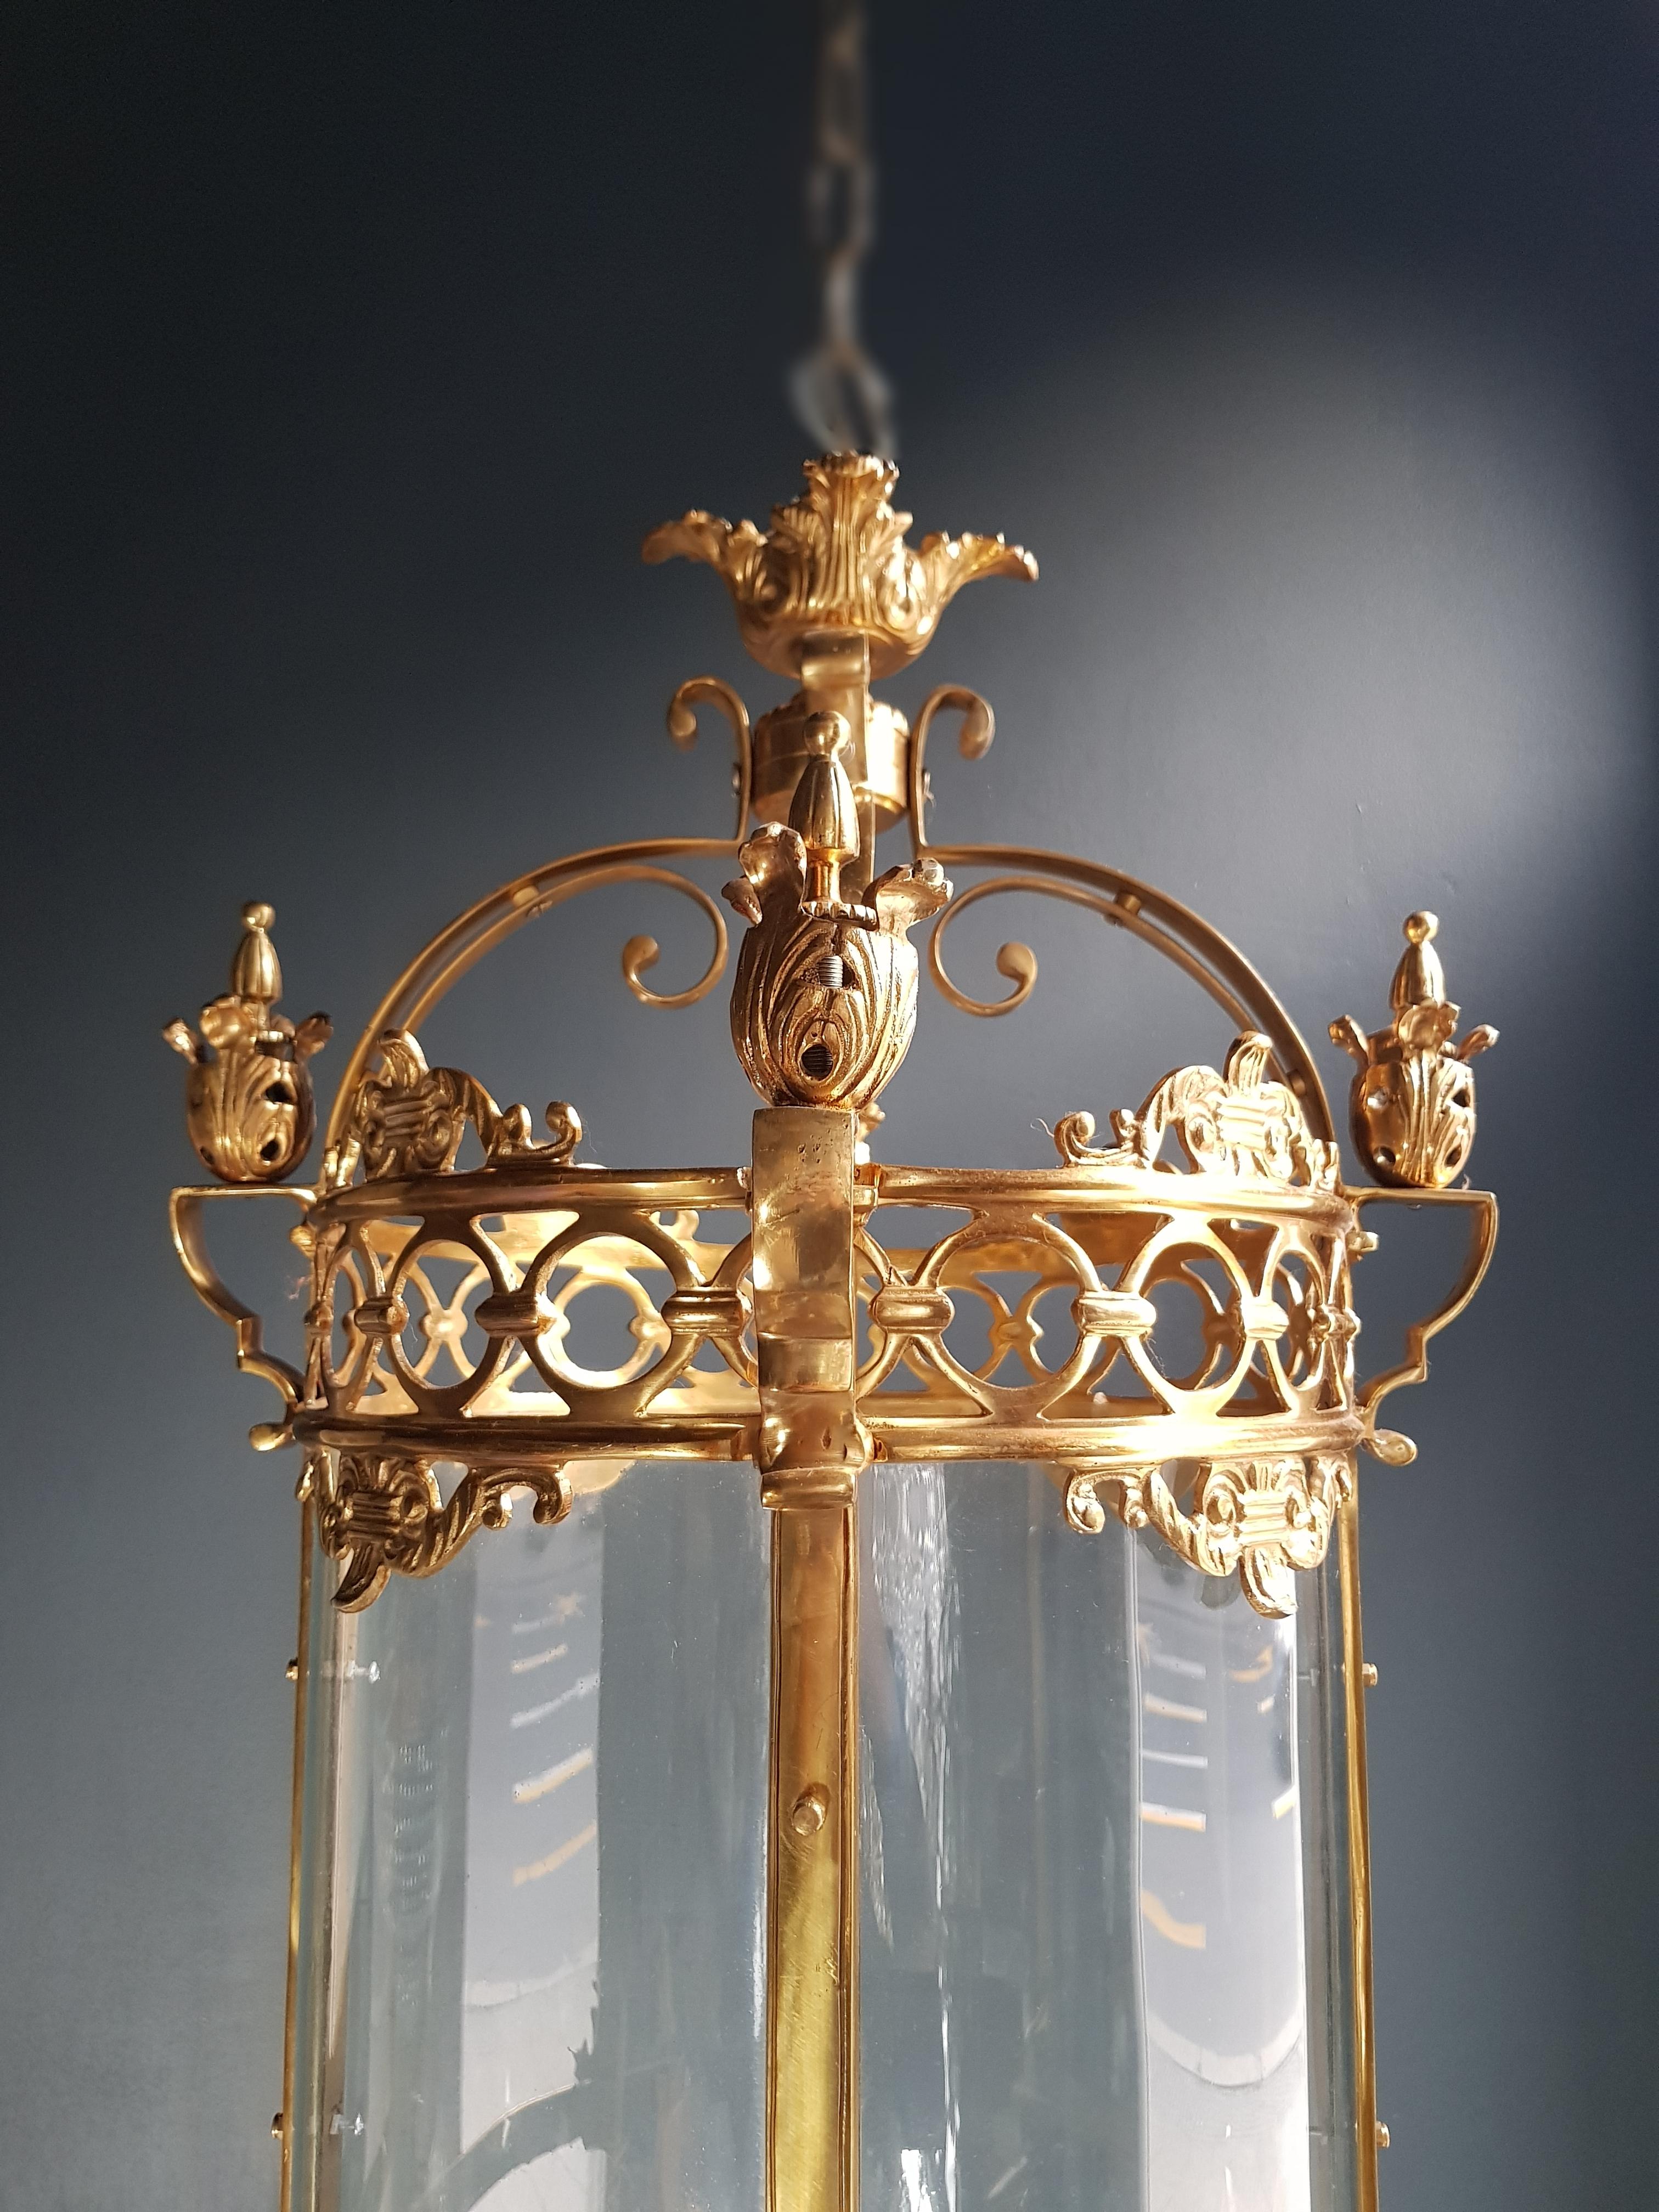 Large Cylindrical Lantern in Louis XVI Style Brass Glass Pendant Lighting In New Condition For Sale In Berlin, DE